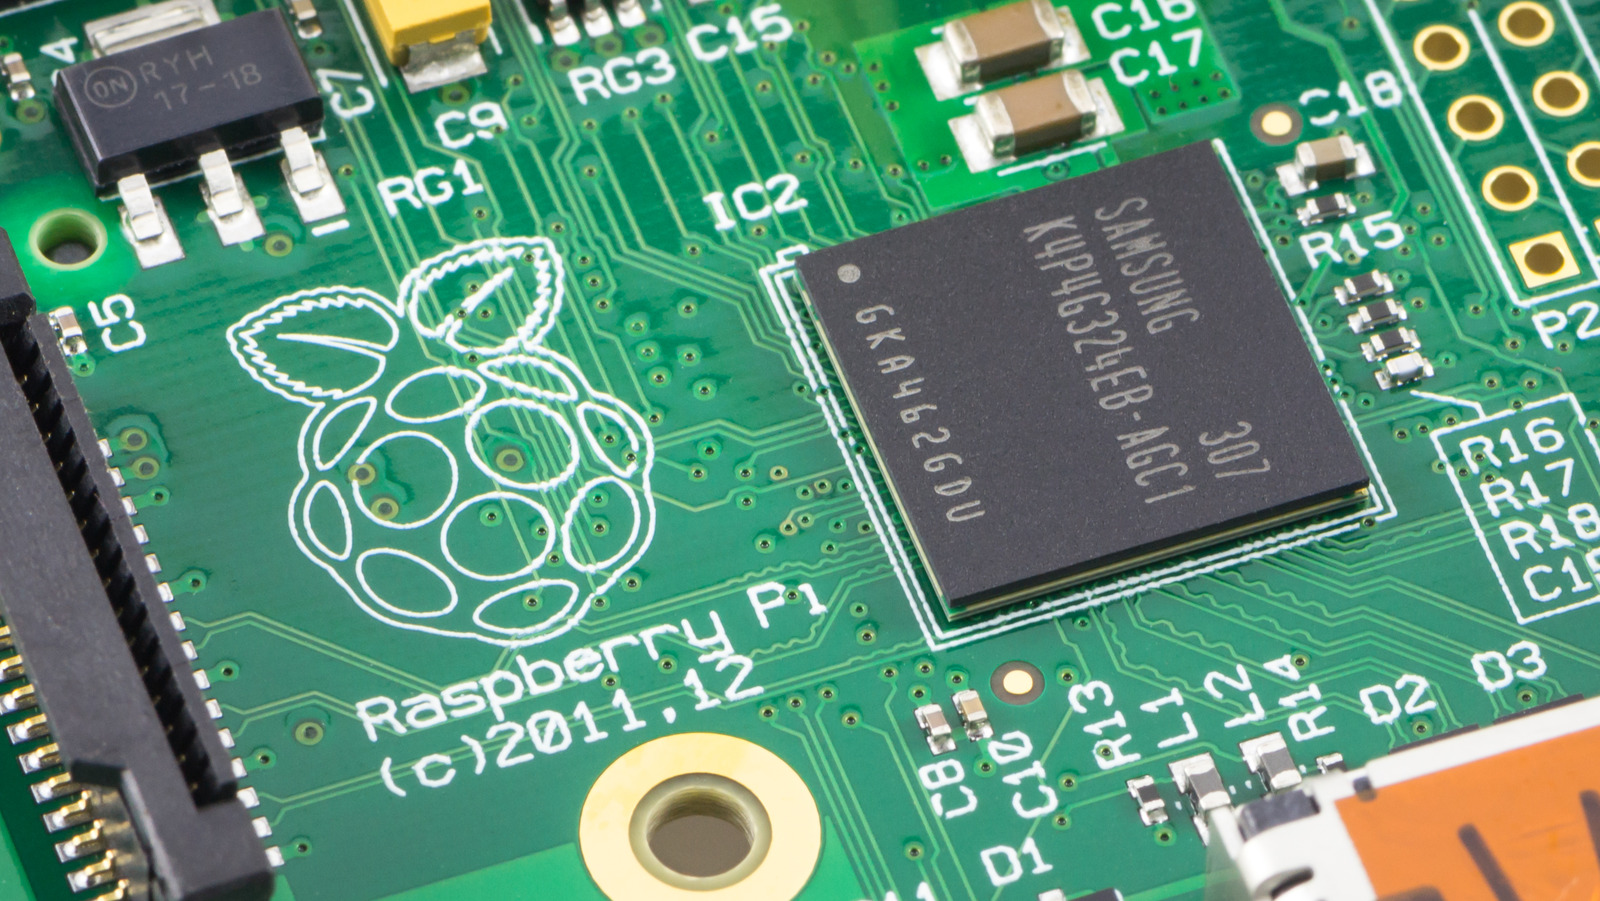 How To Boot A Raspberry Pi From A USB Drive